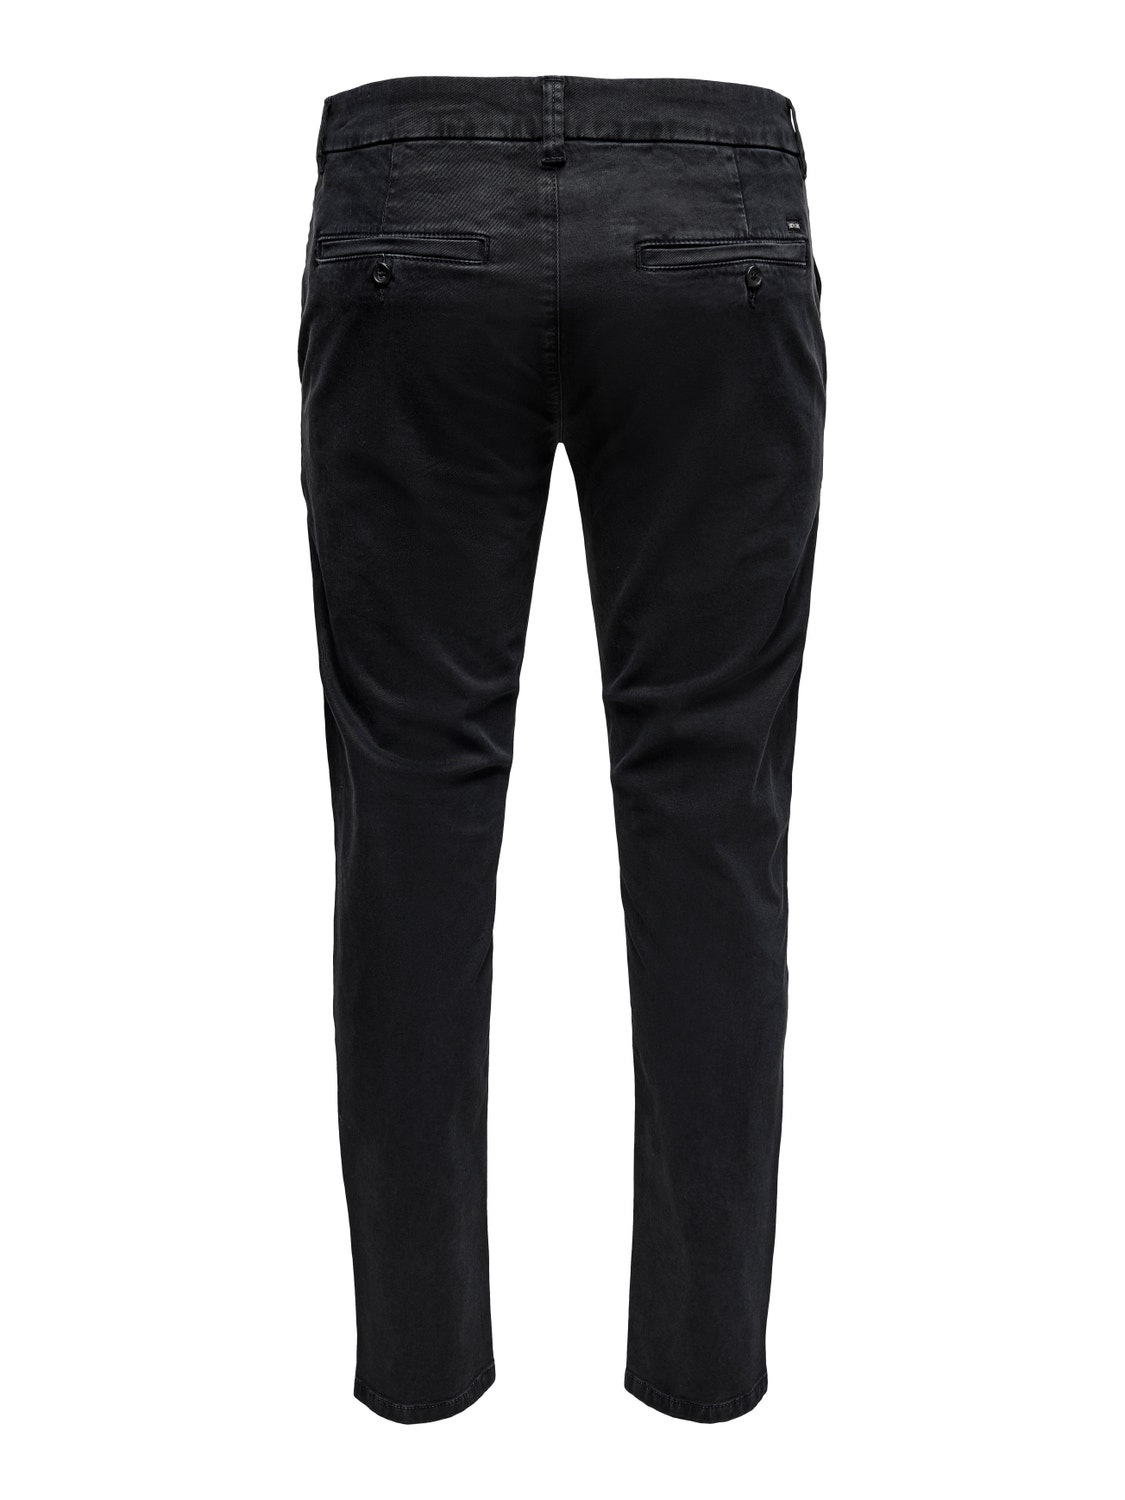 ONLY & SONS Slim Fit Mid waist Chinos -Black - 22019934